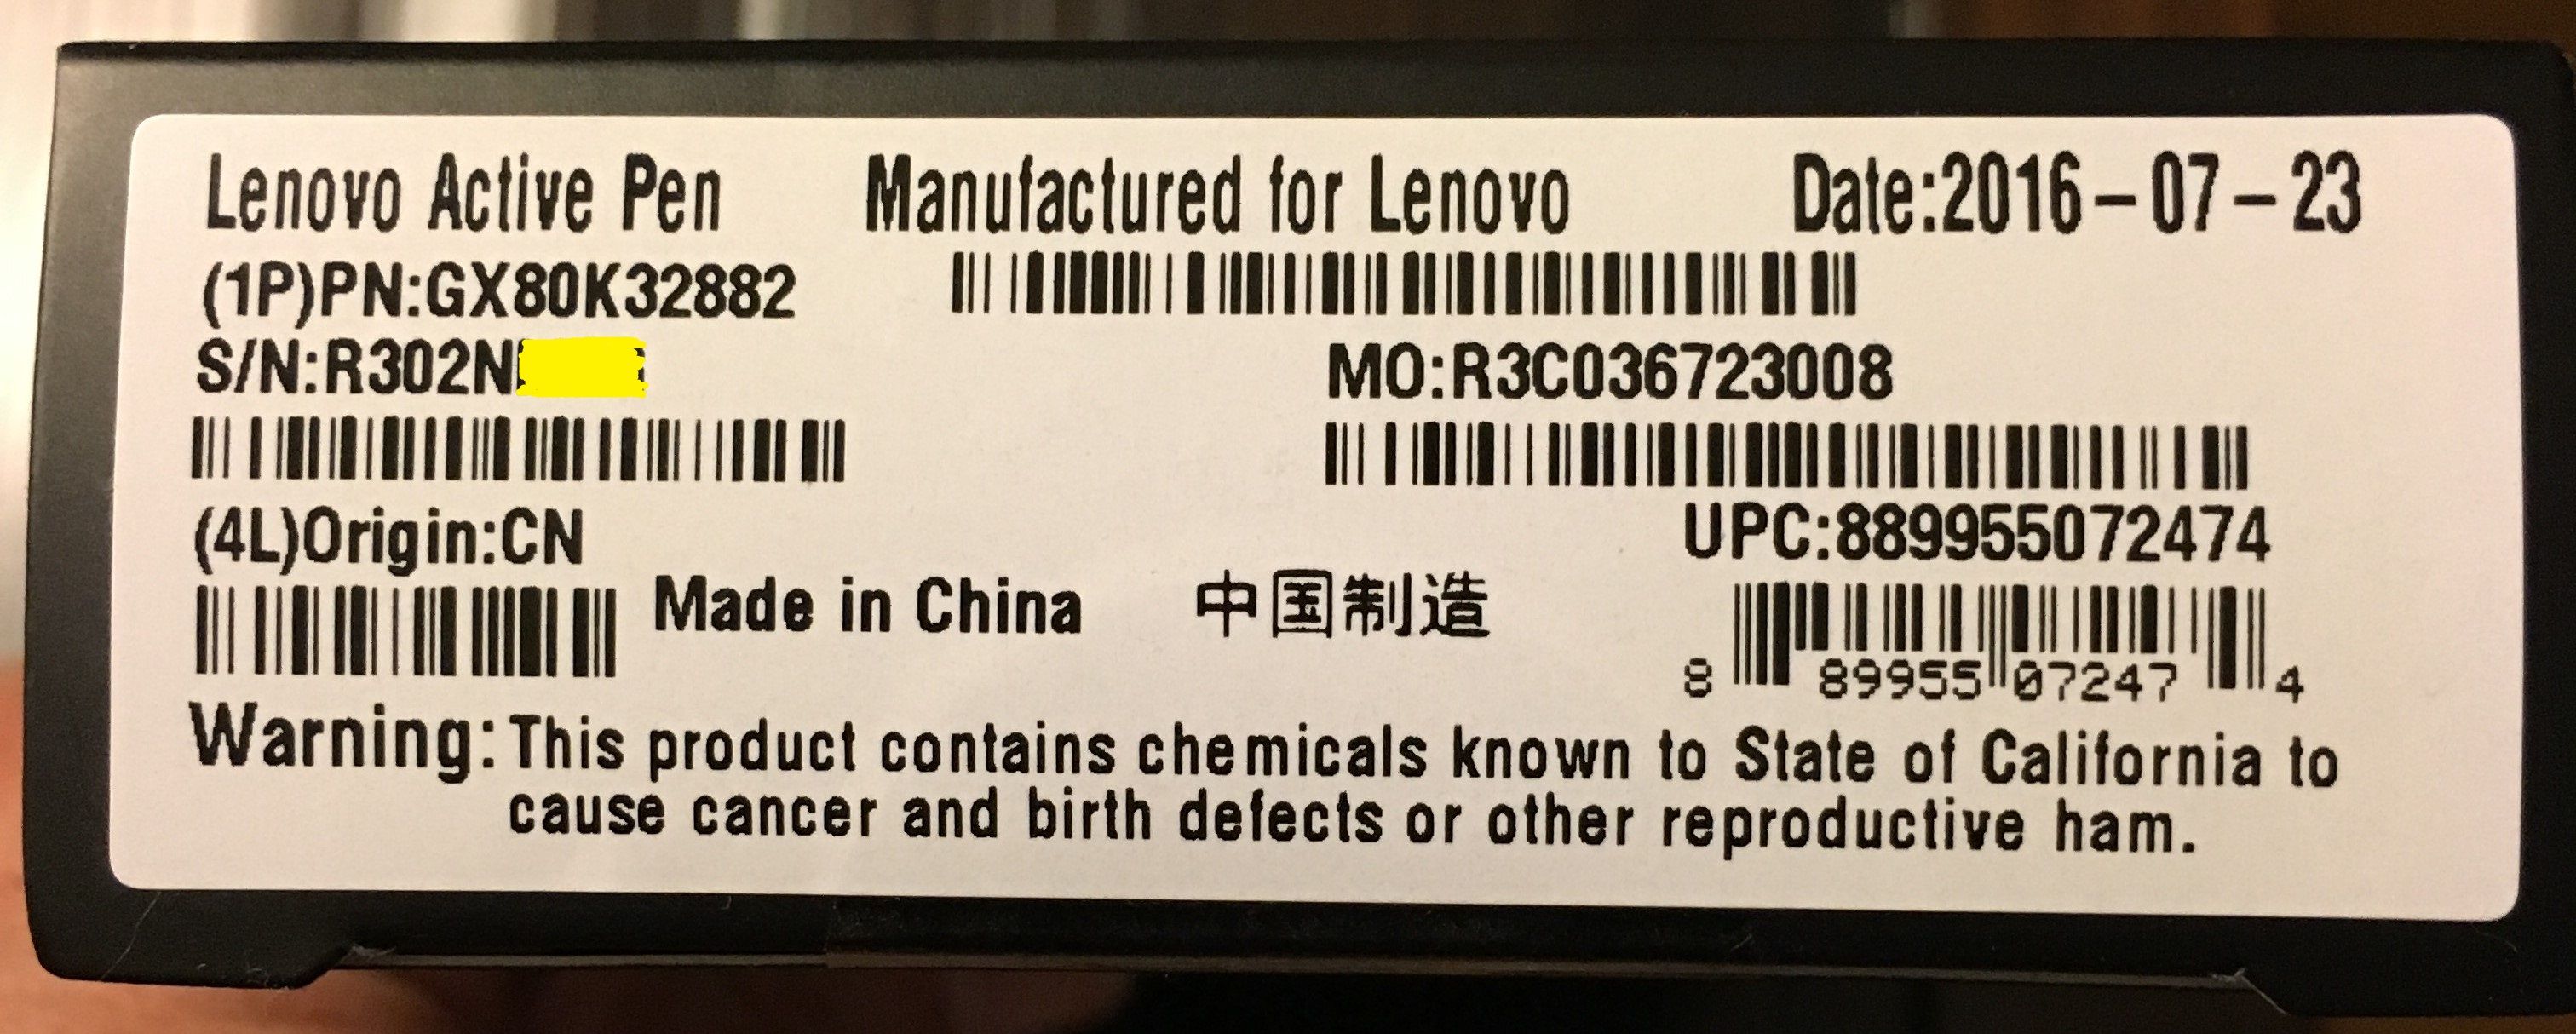 how to change lenovo laptop serial number in bios